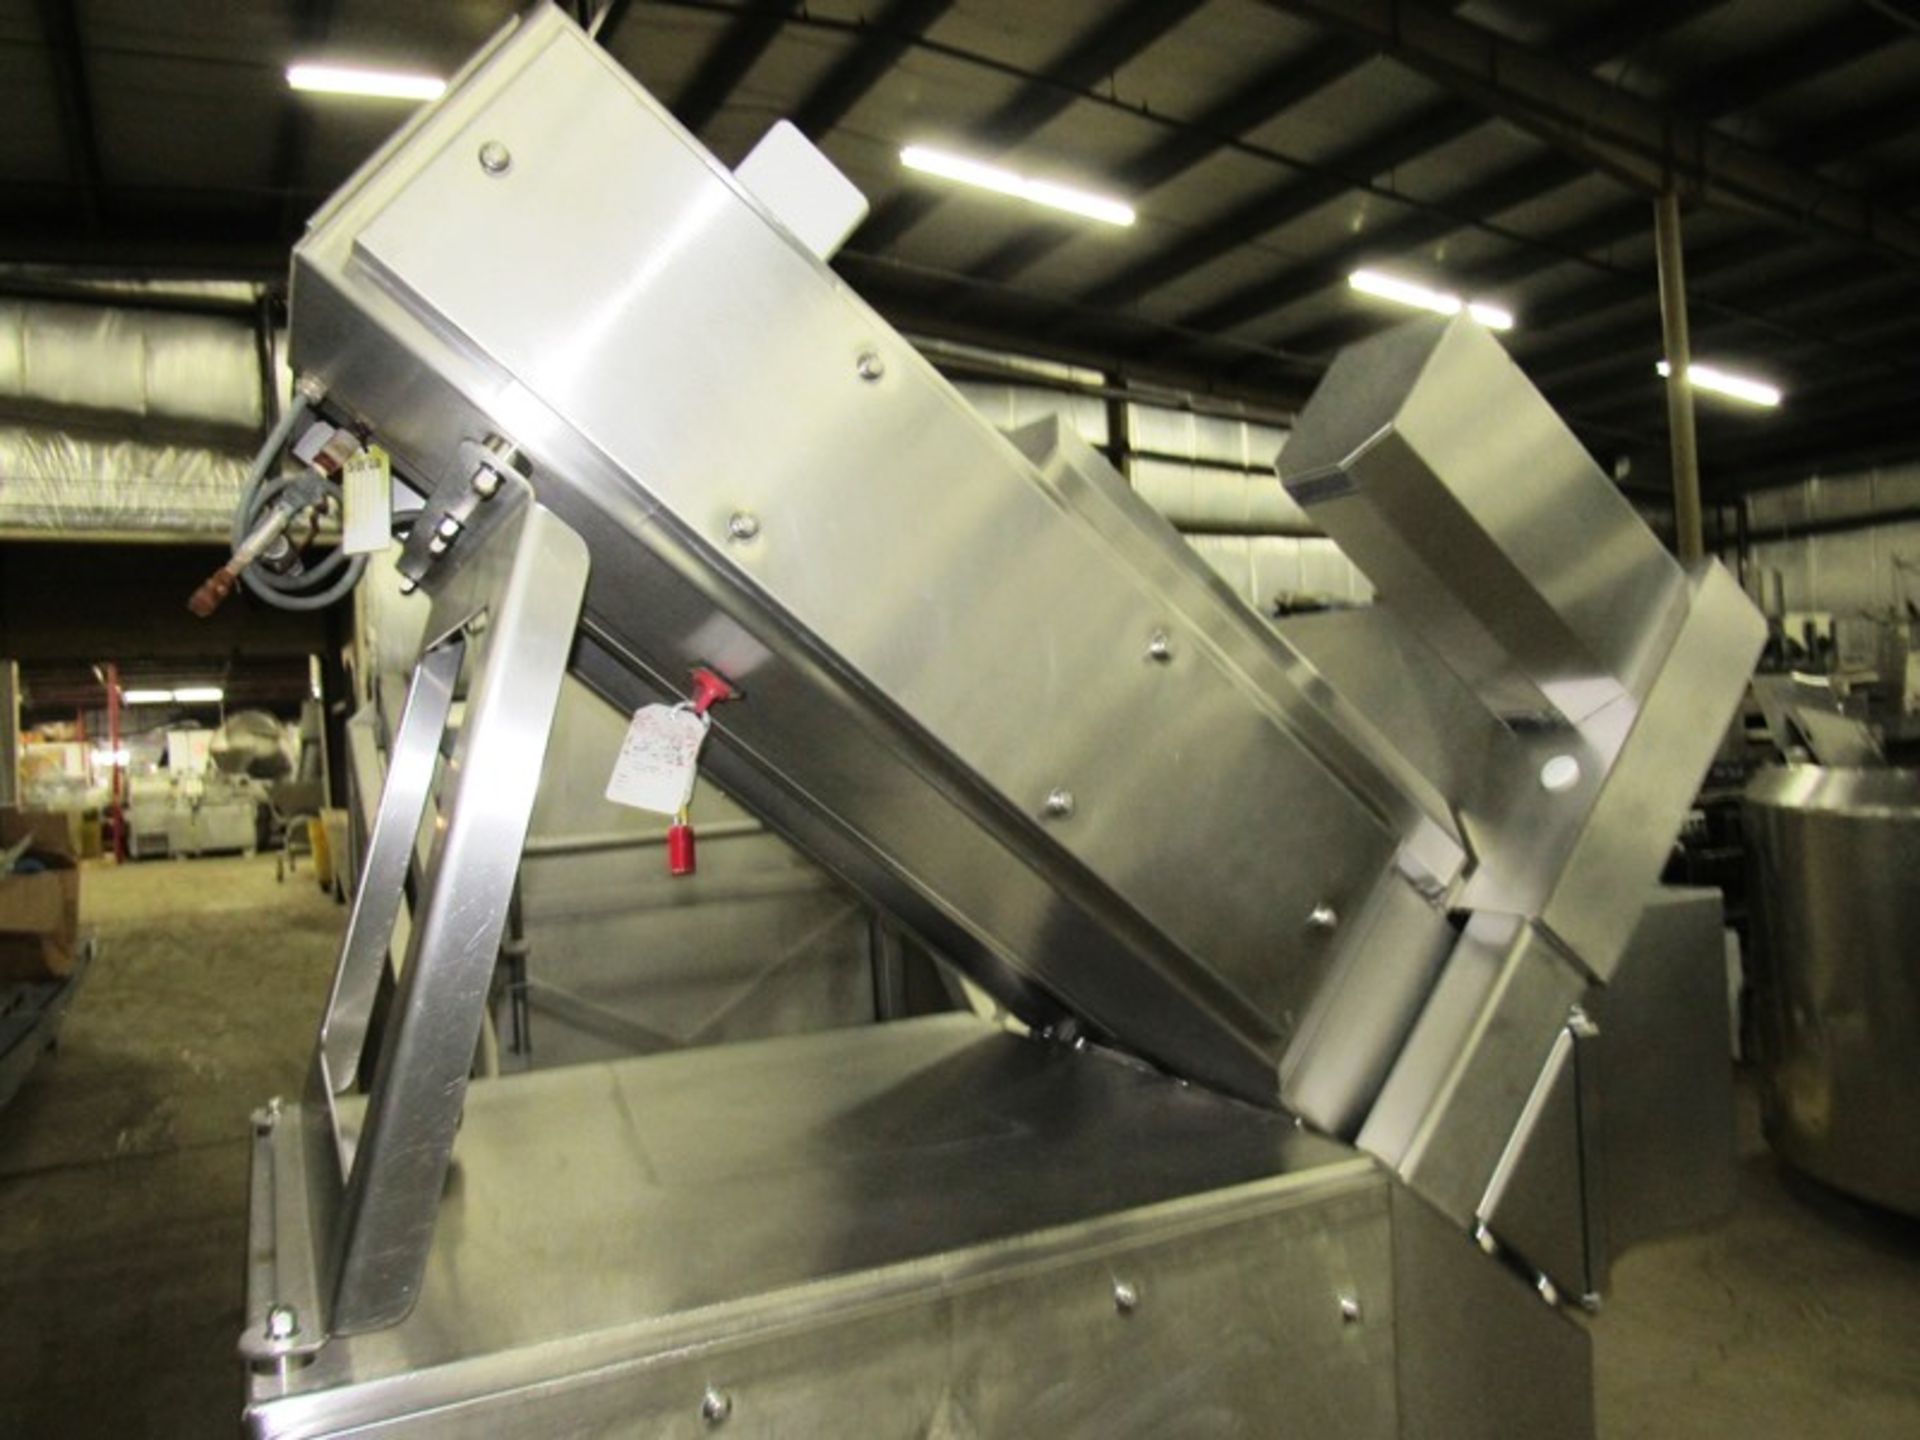 Weber Mdl. CCS602 High Speed Slicer, missing blade & product grippers, 220 volts, Ser. #196, Located - Image 4 of 8